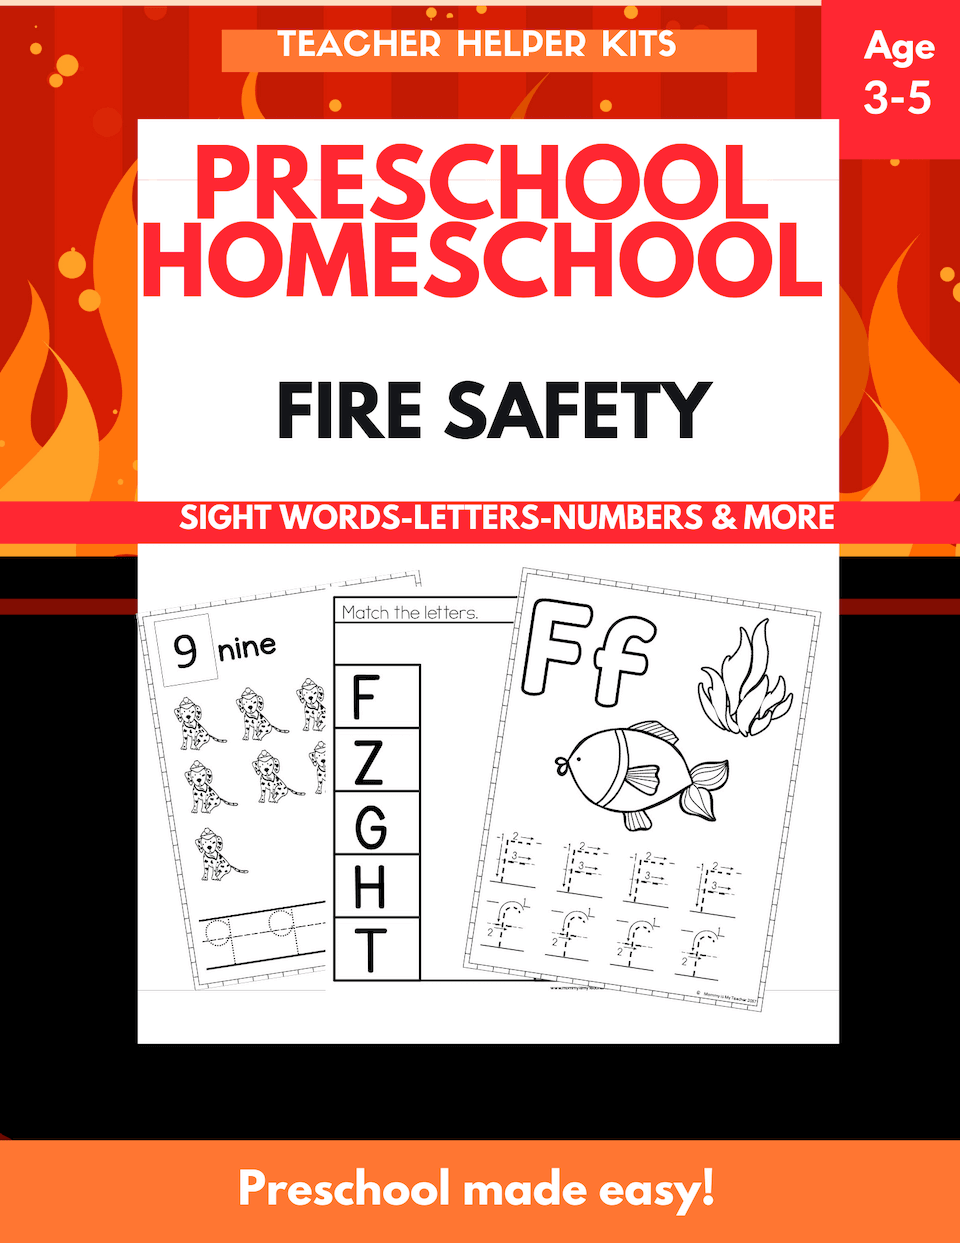 FIRE SAFETY COVER-2-2-2.png